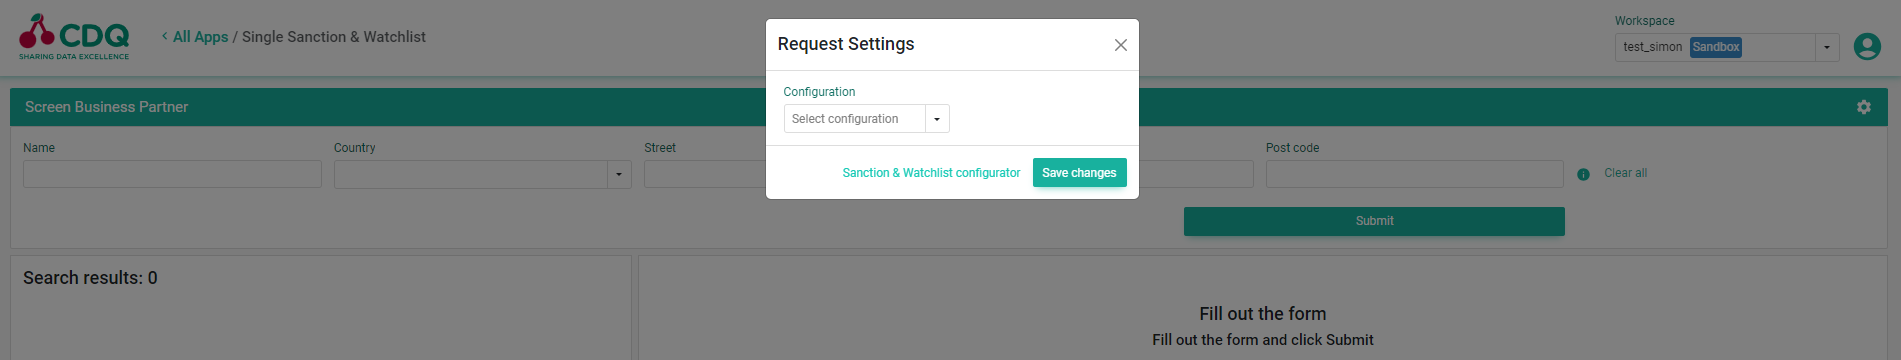 Selecting Configuration